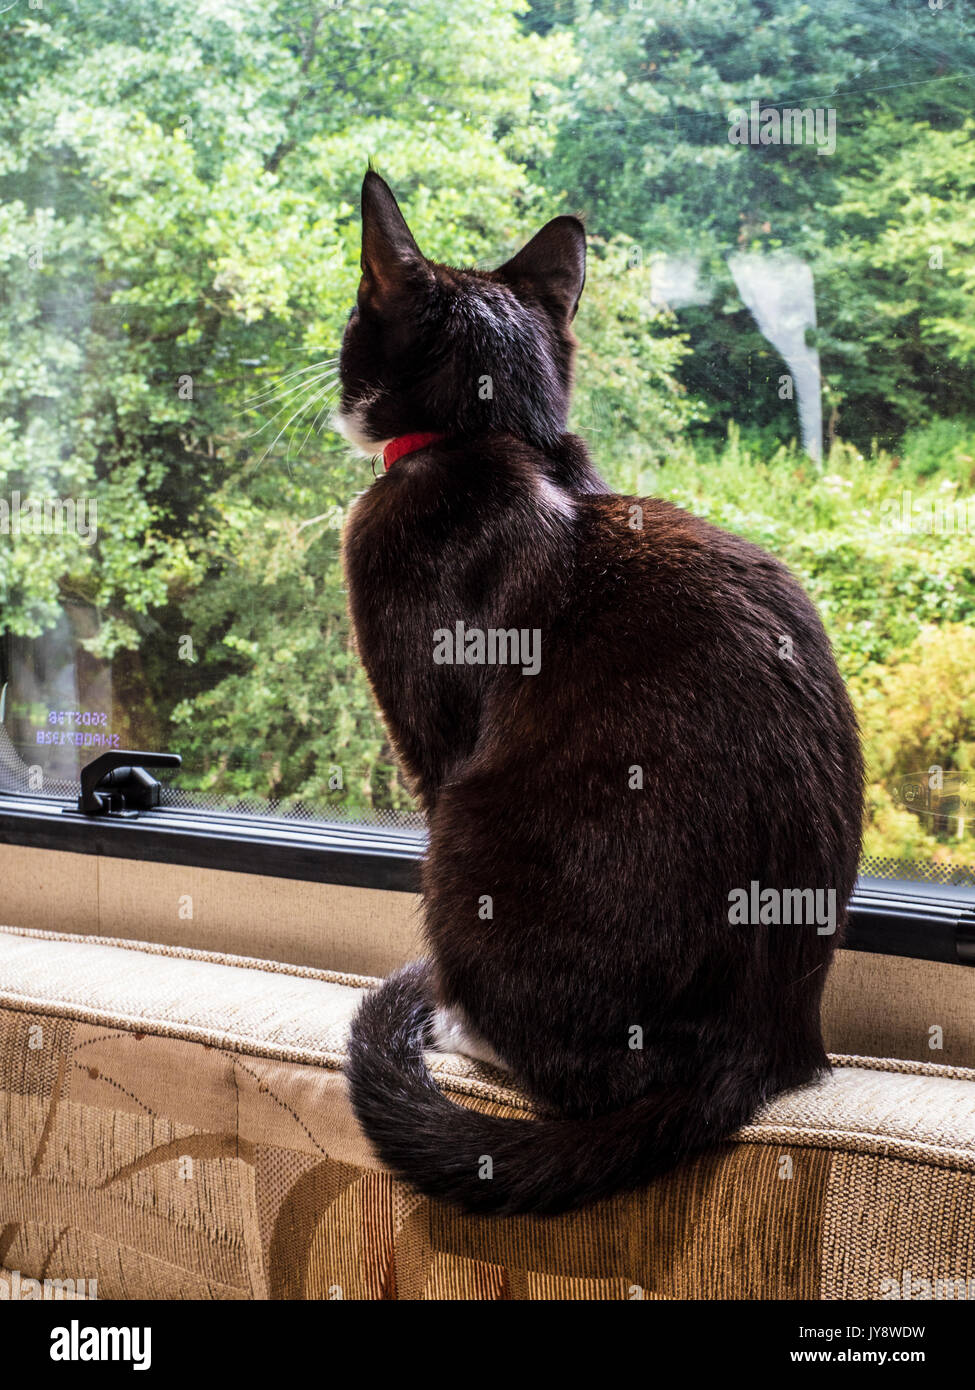 A black cat sits by a caravan window and gazes at the scene outside. Stock Photo